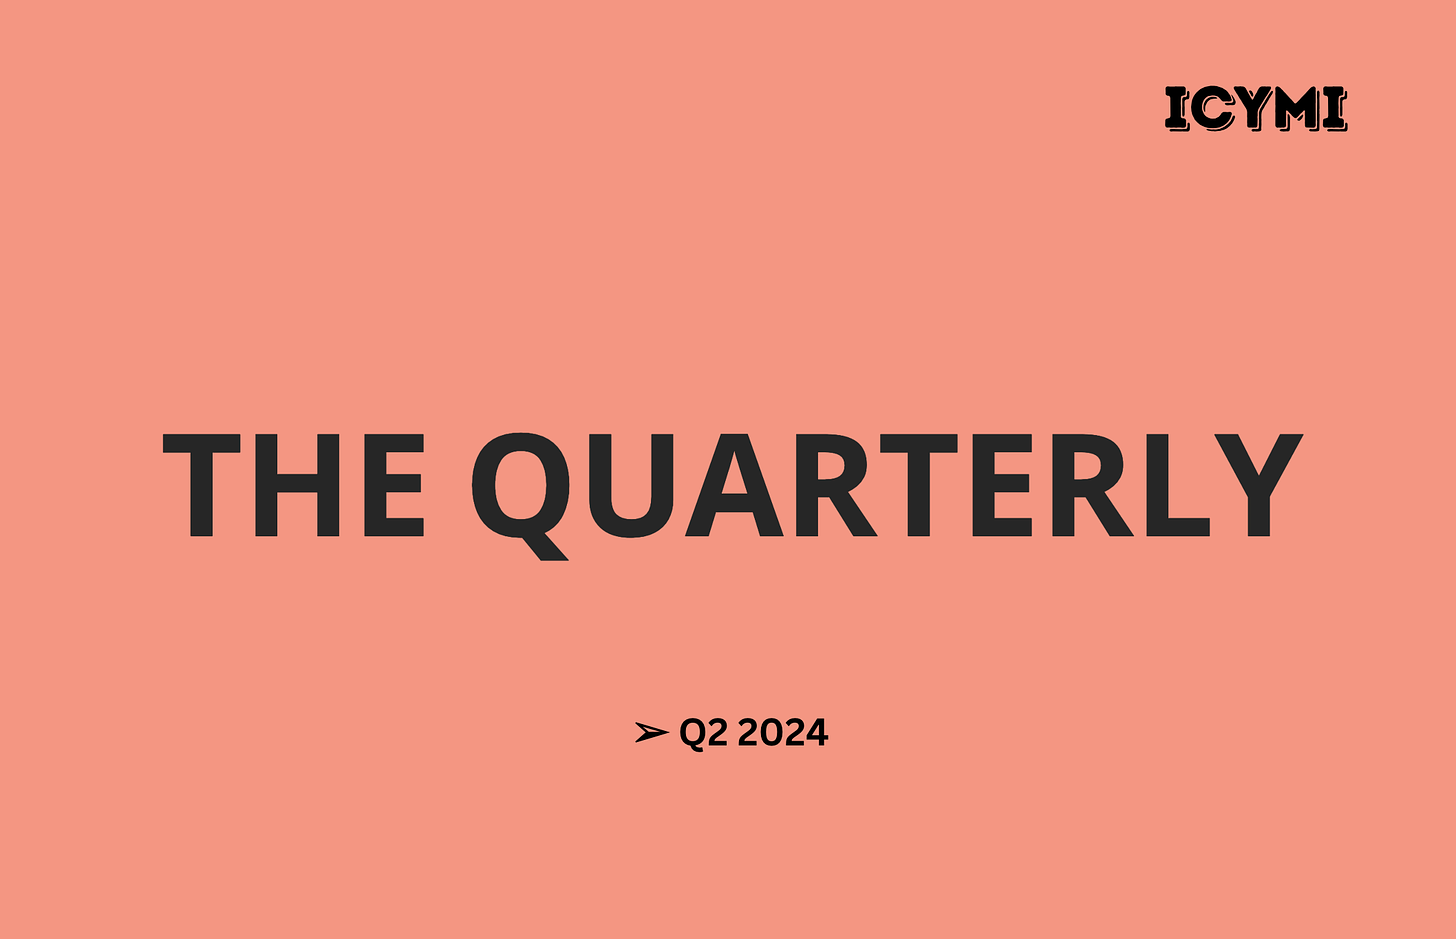 Screenshot of blue text on a pink background with the ICYMI logo, The Quarterly and Q2 2024